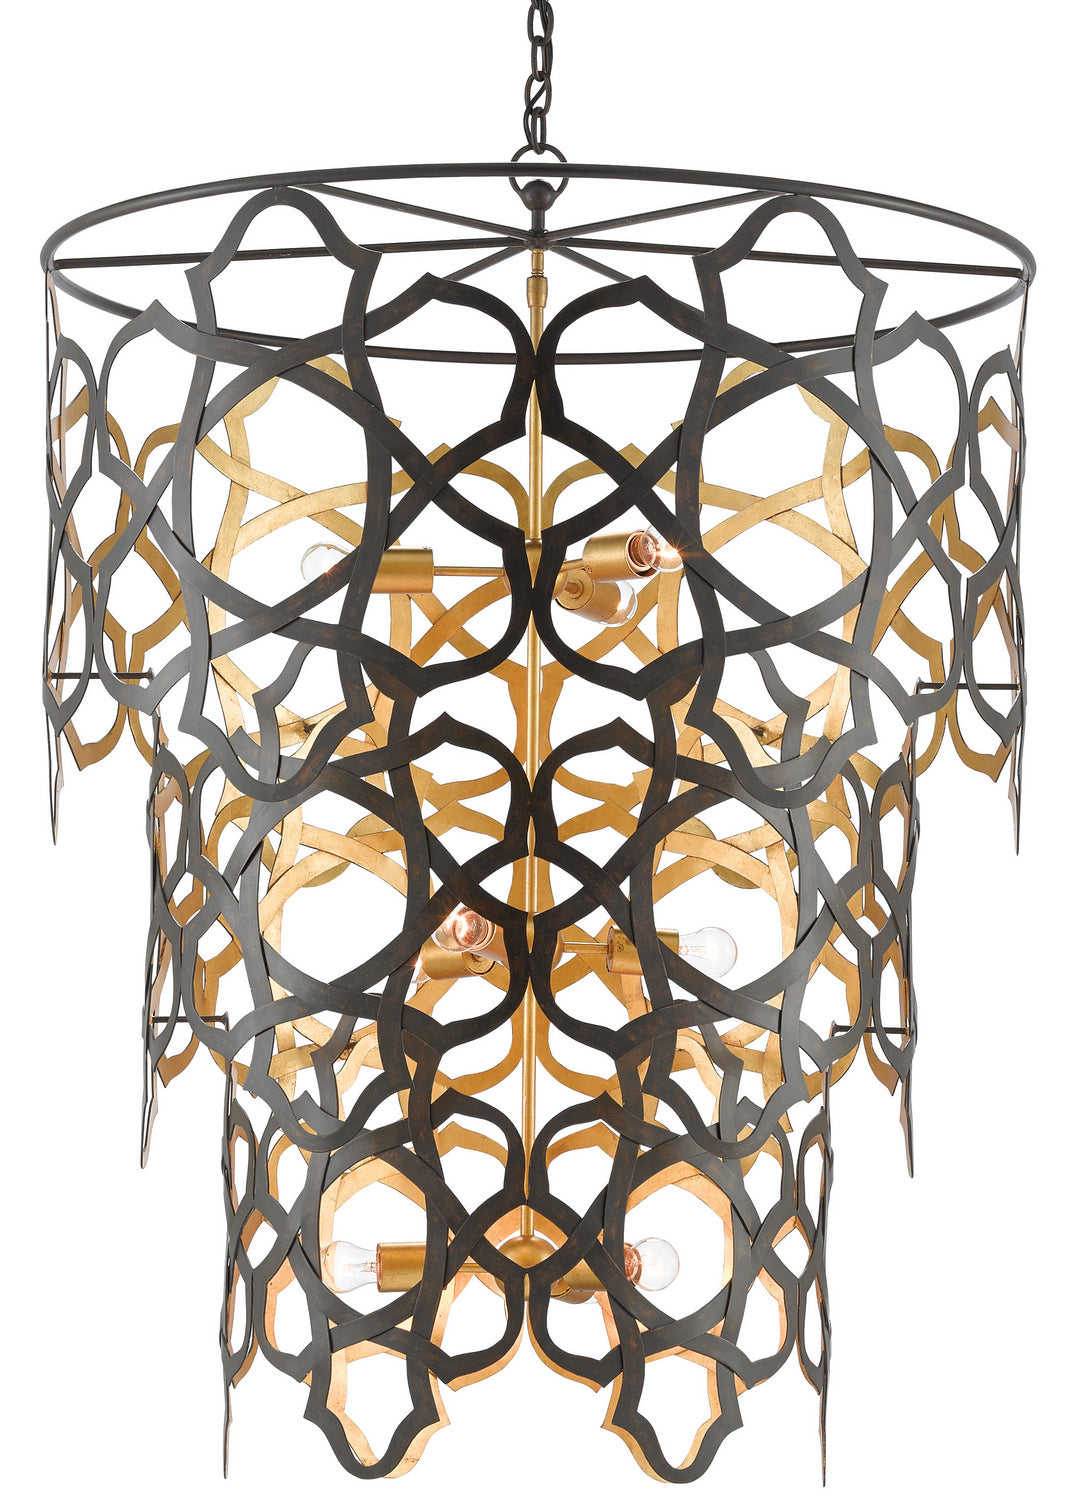 Nine Light Chandelier from the Mauresque collection in Bronze Gold/Contemporary Gold Leaf finish